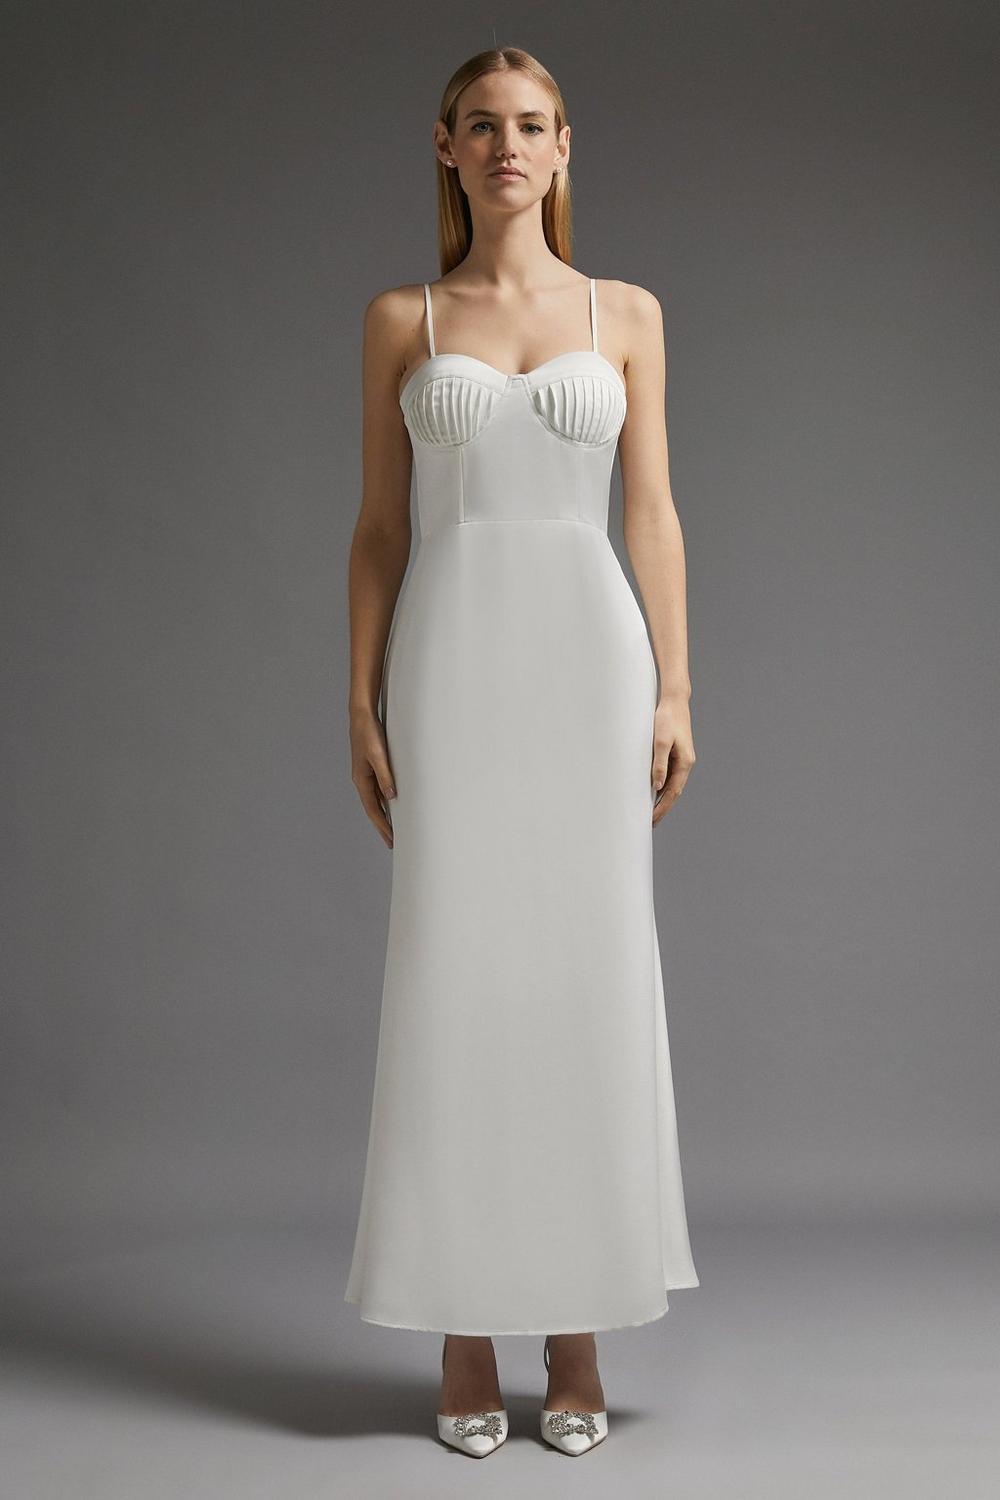 40 Alternative Wedding Dresses for Non Traditional Individuals ...